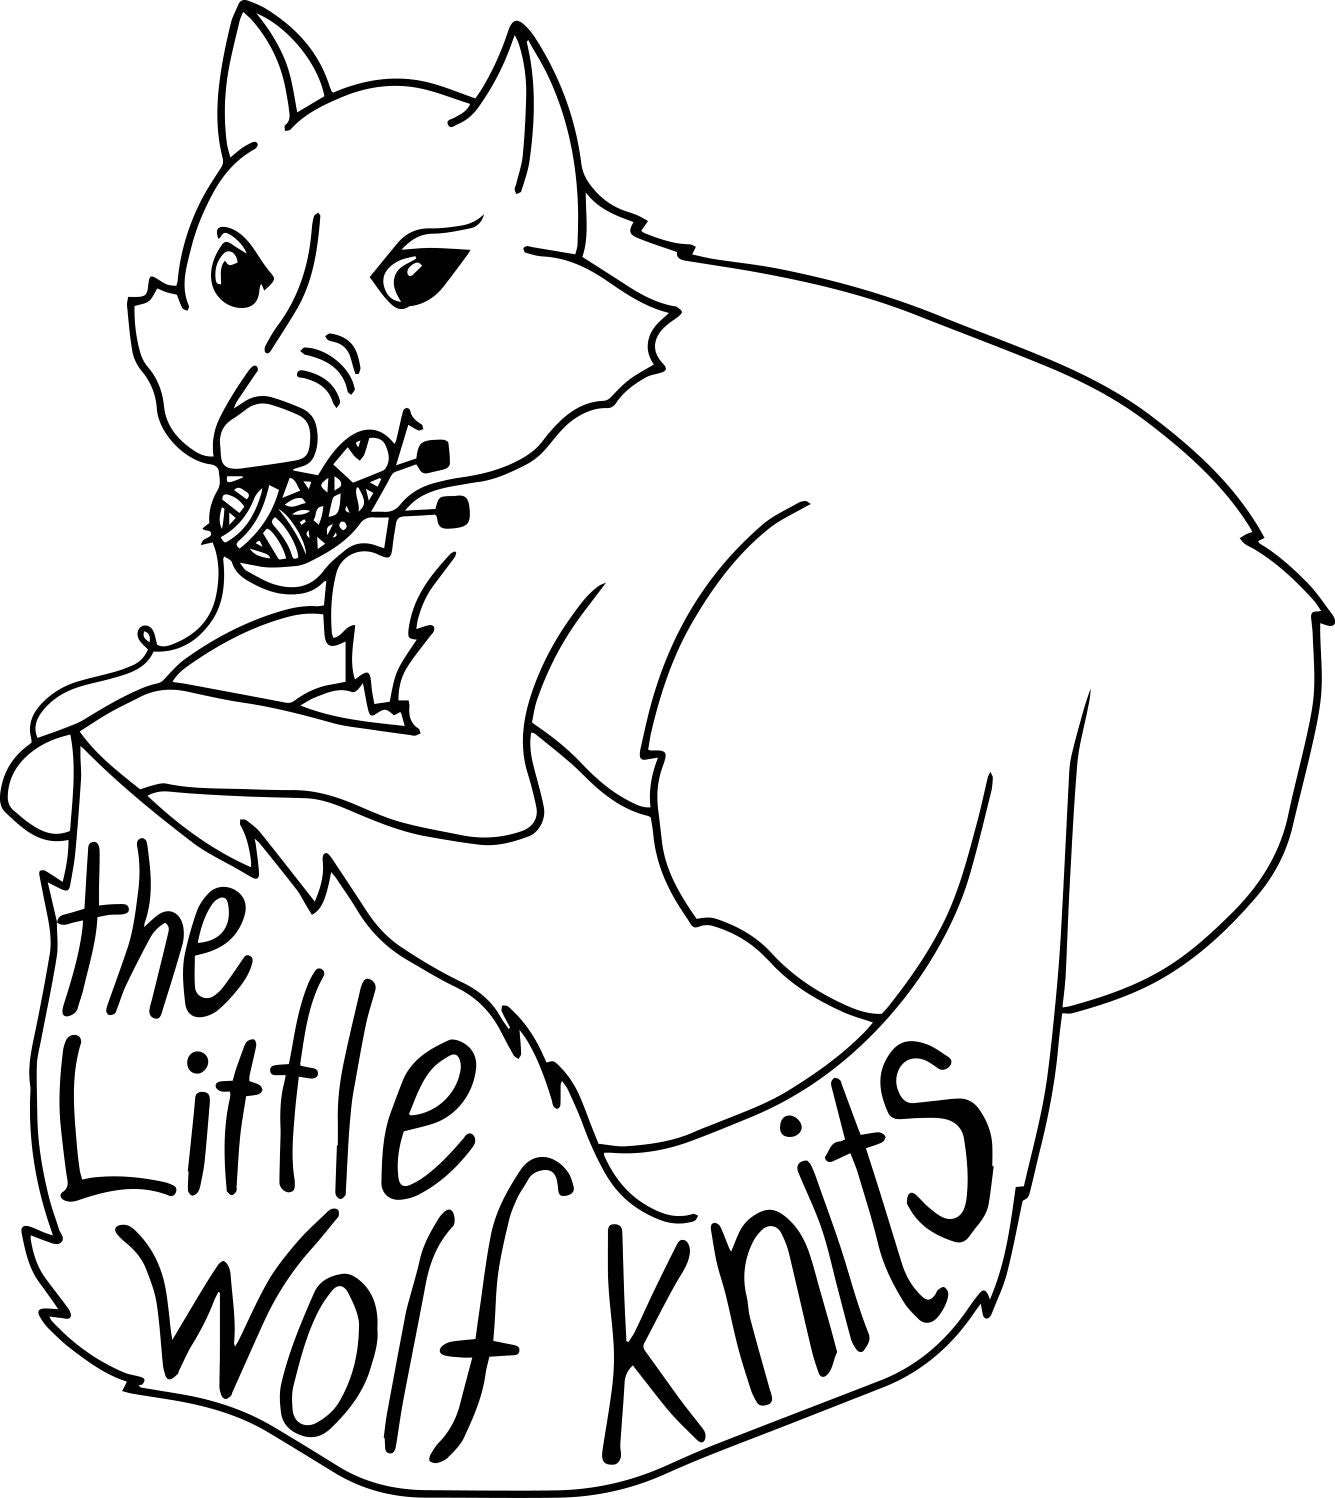 thelittlewolfknits gift card